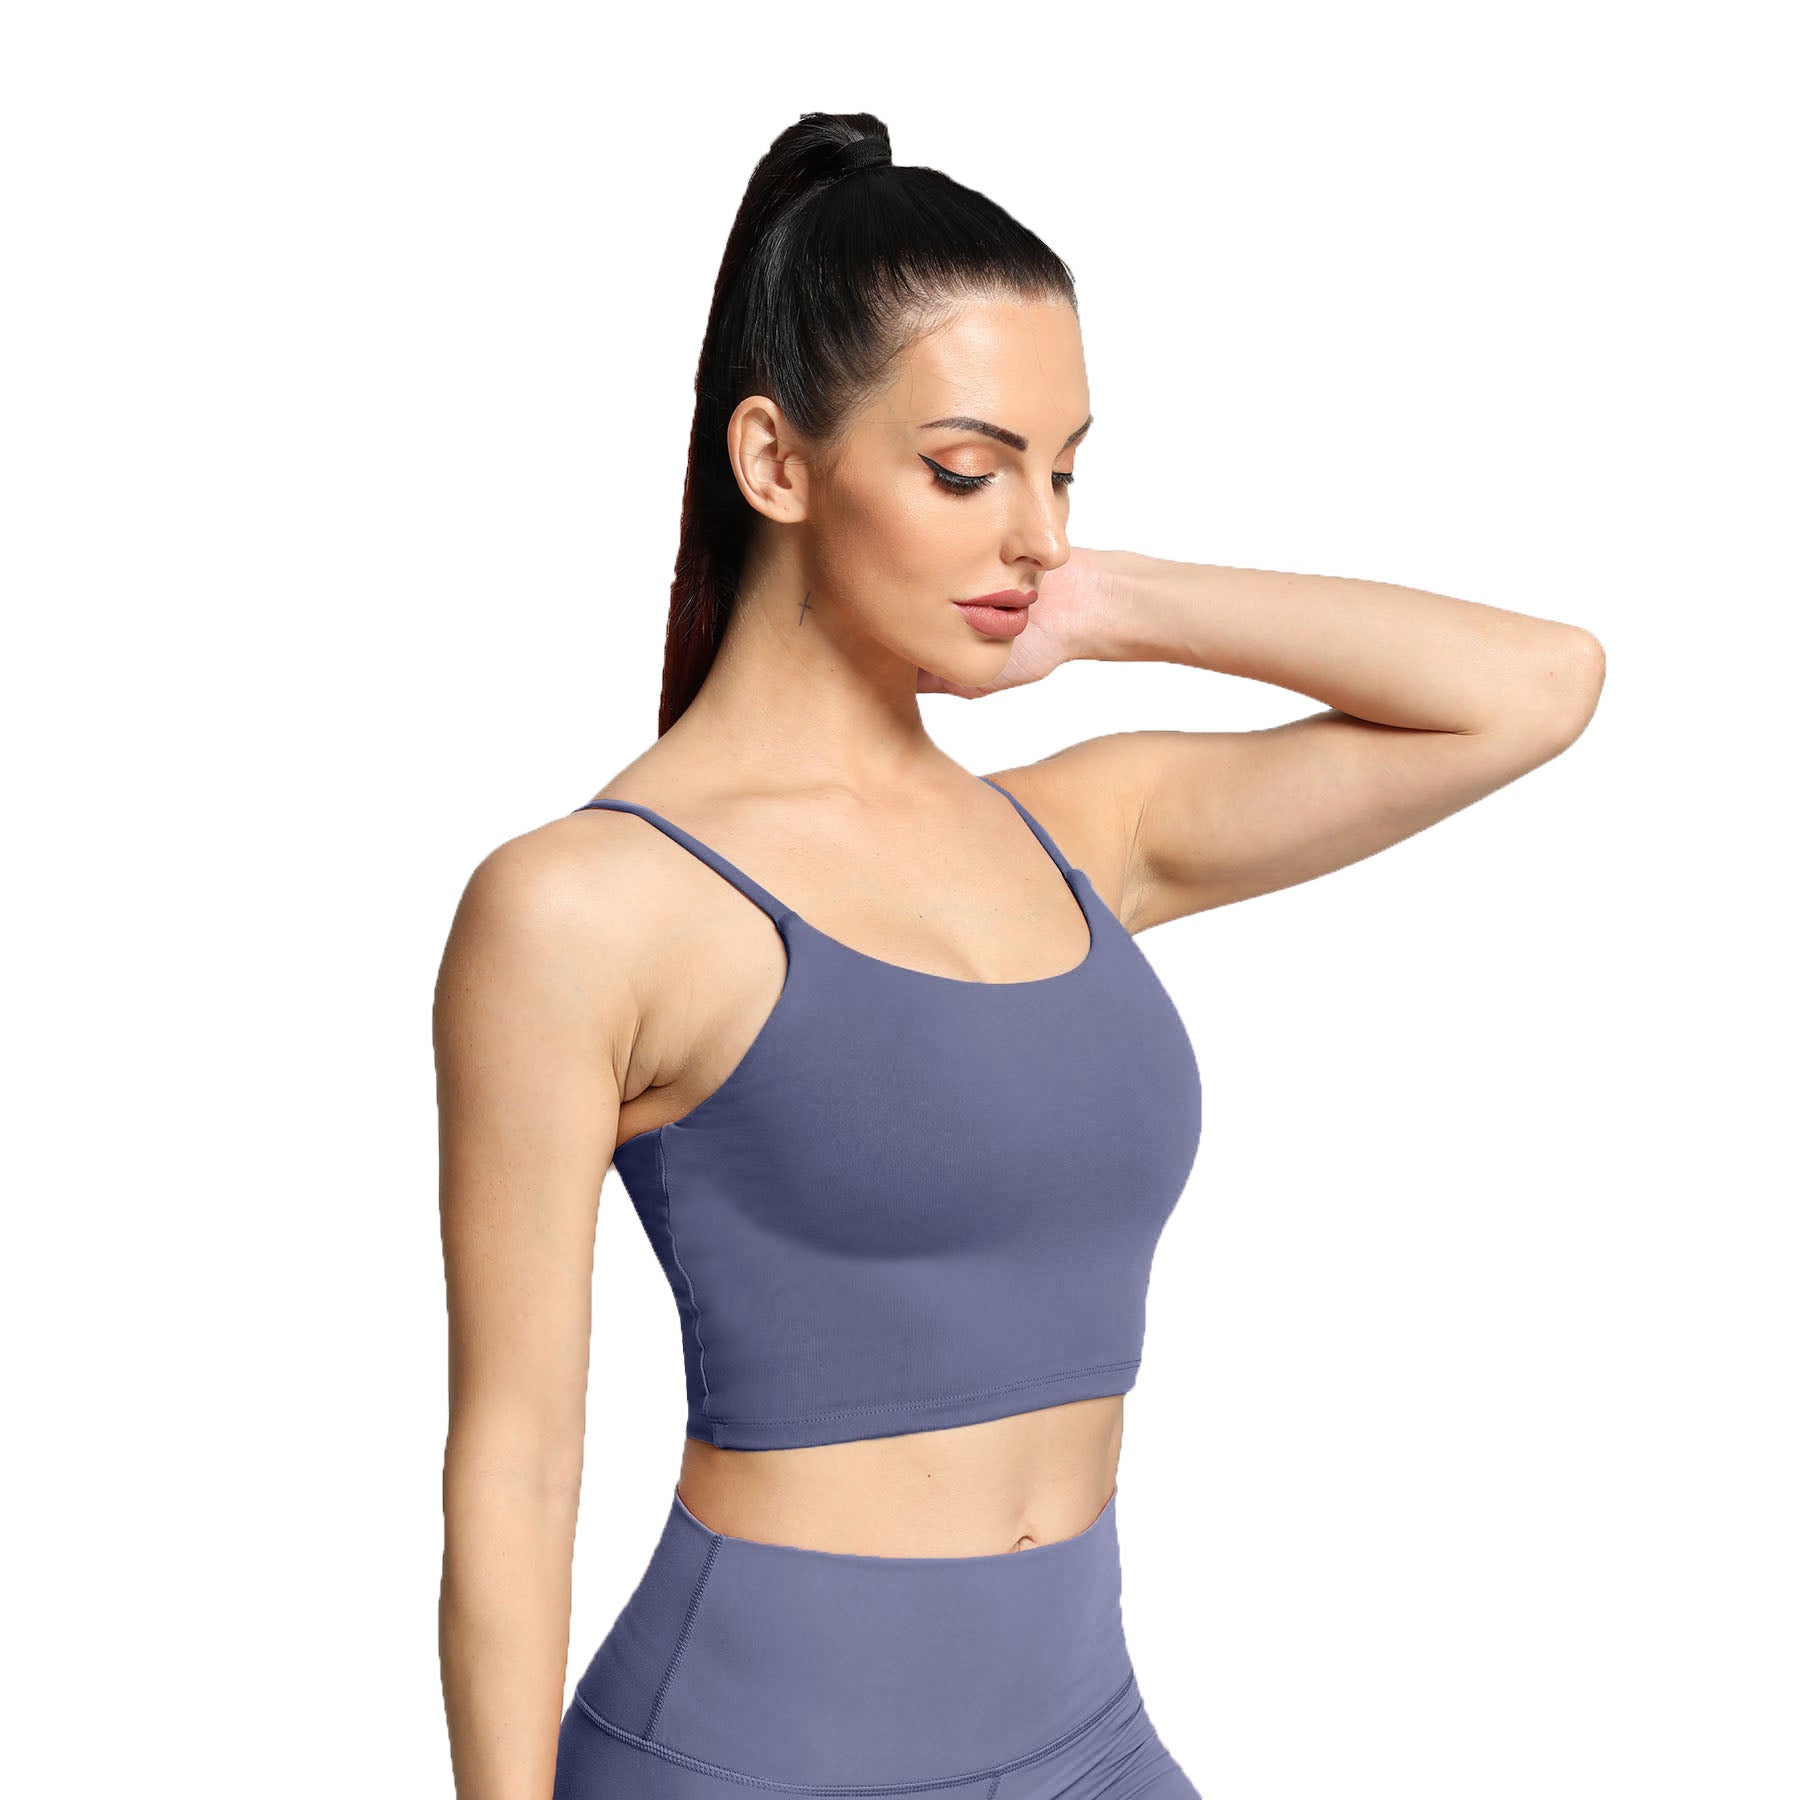 Aoxjox Buttery Soft Solid Color Sports Bra Crop Top